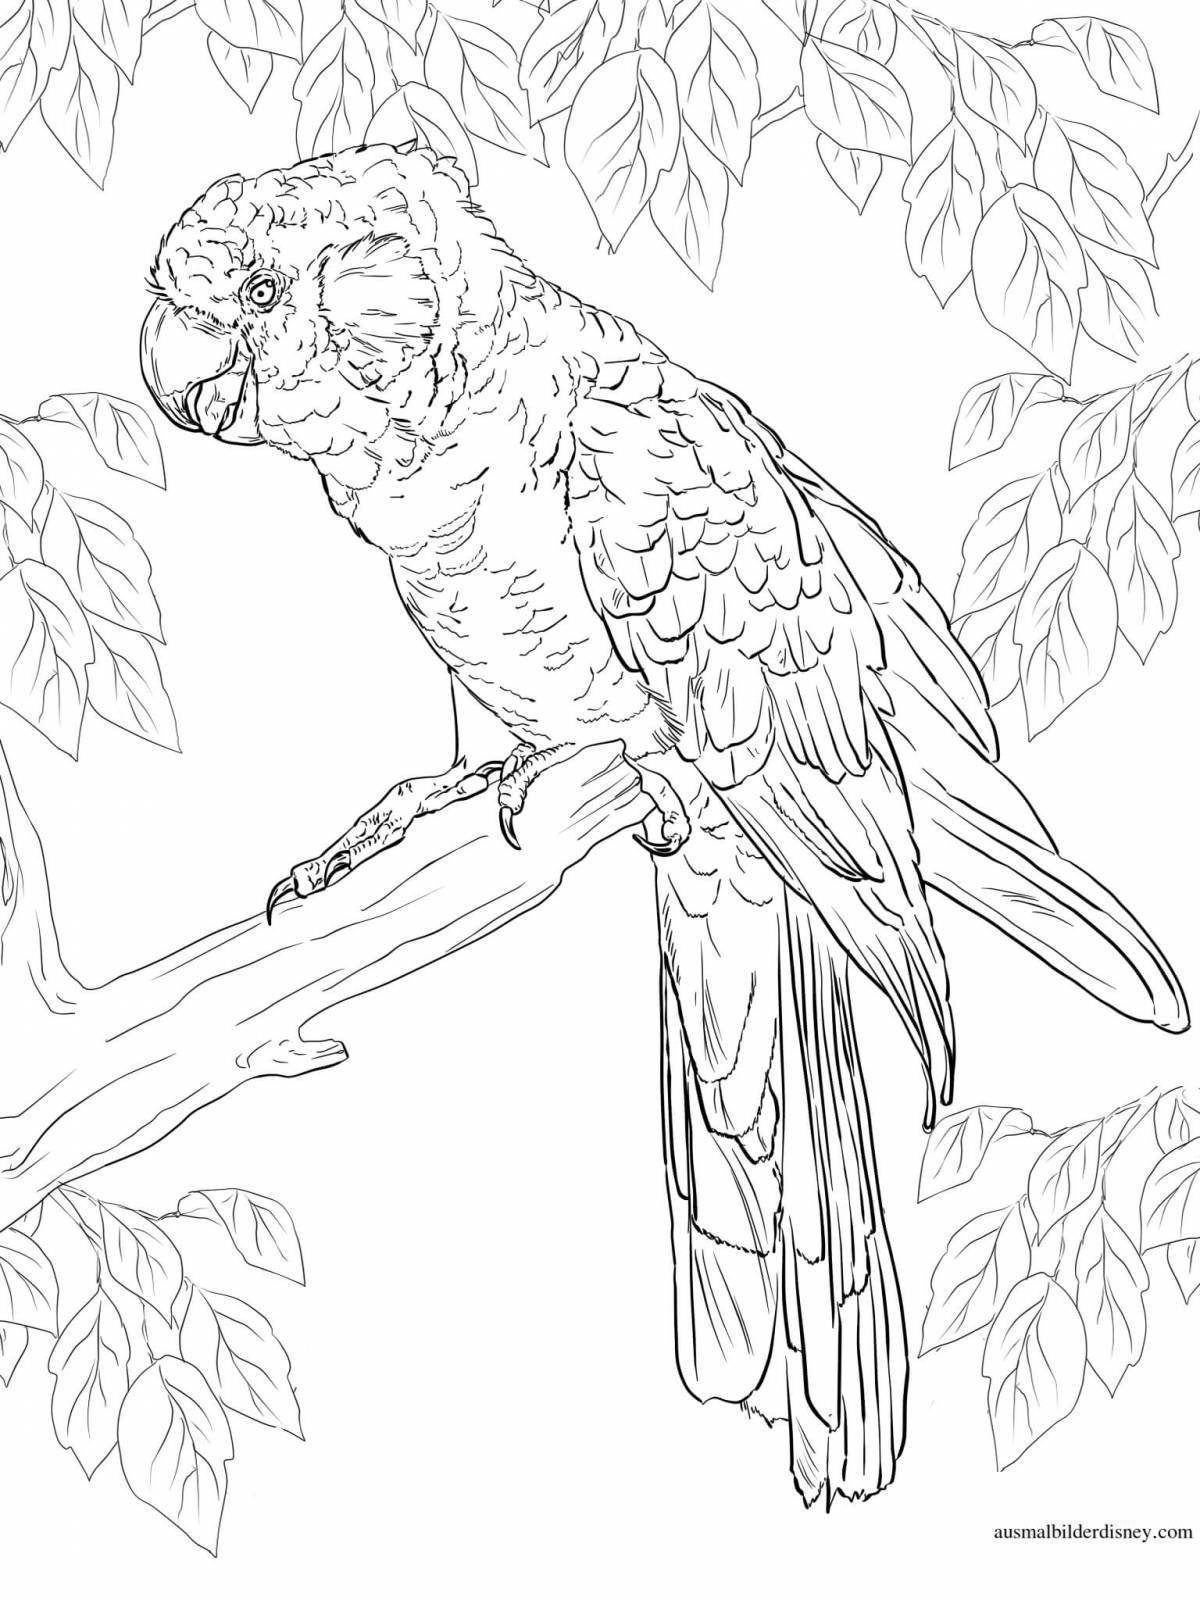 Coloring page energetic parrot